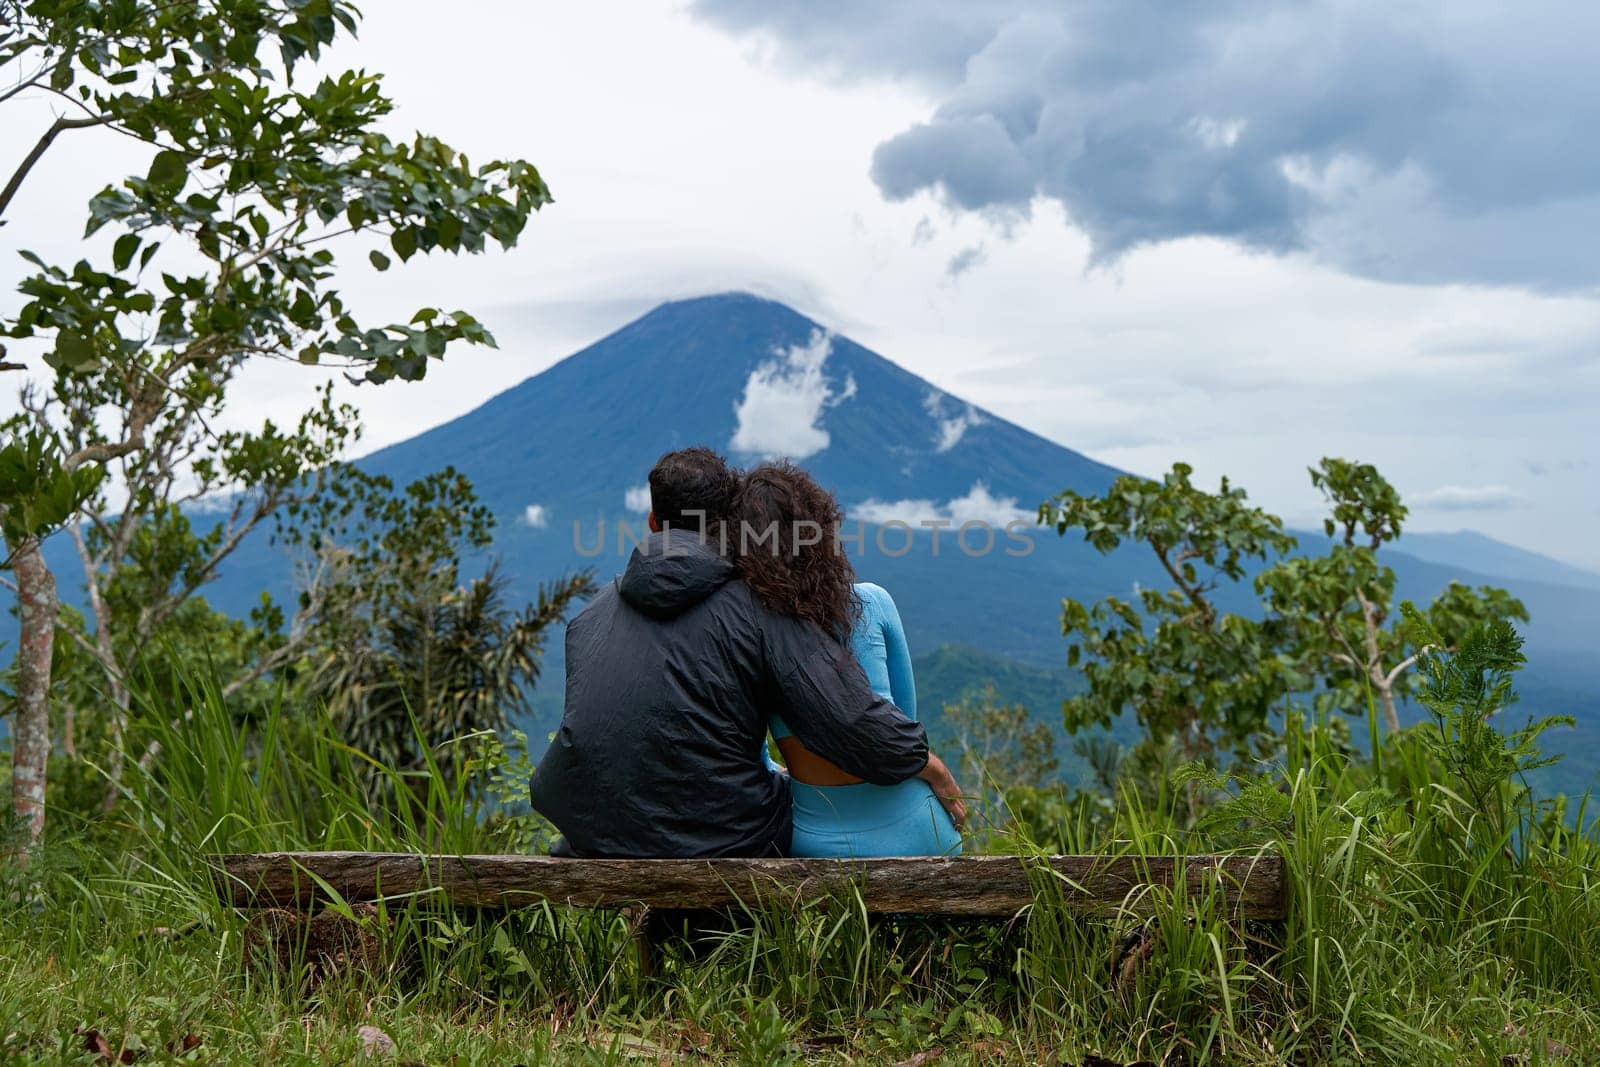 A couple of lovers are sitting on a bench, hugging each other and enjoying the view of the popular sacred cloud-covered Mount Agung on the island of Bali. by Try_my_best